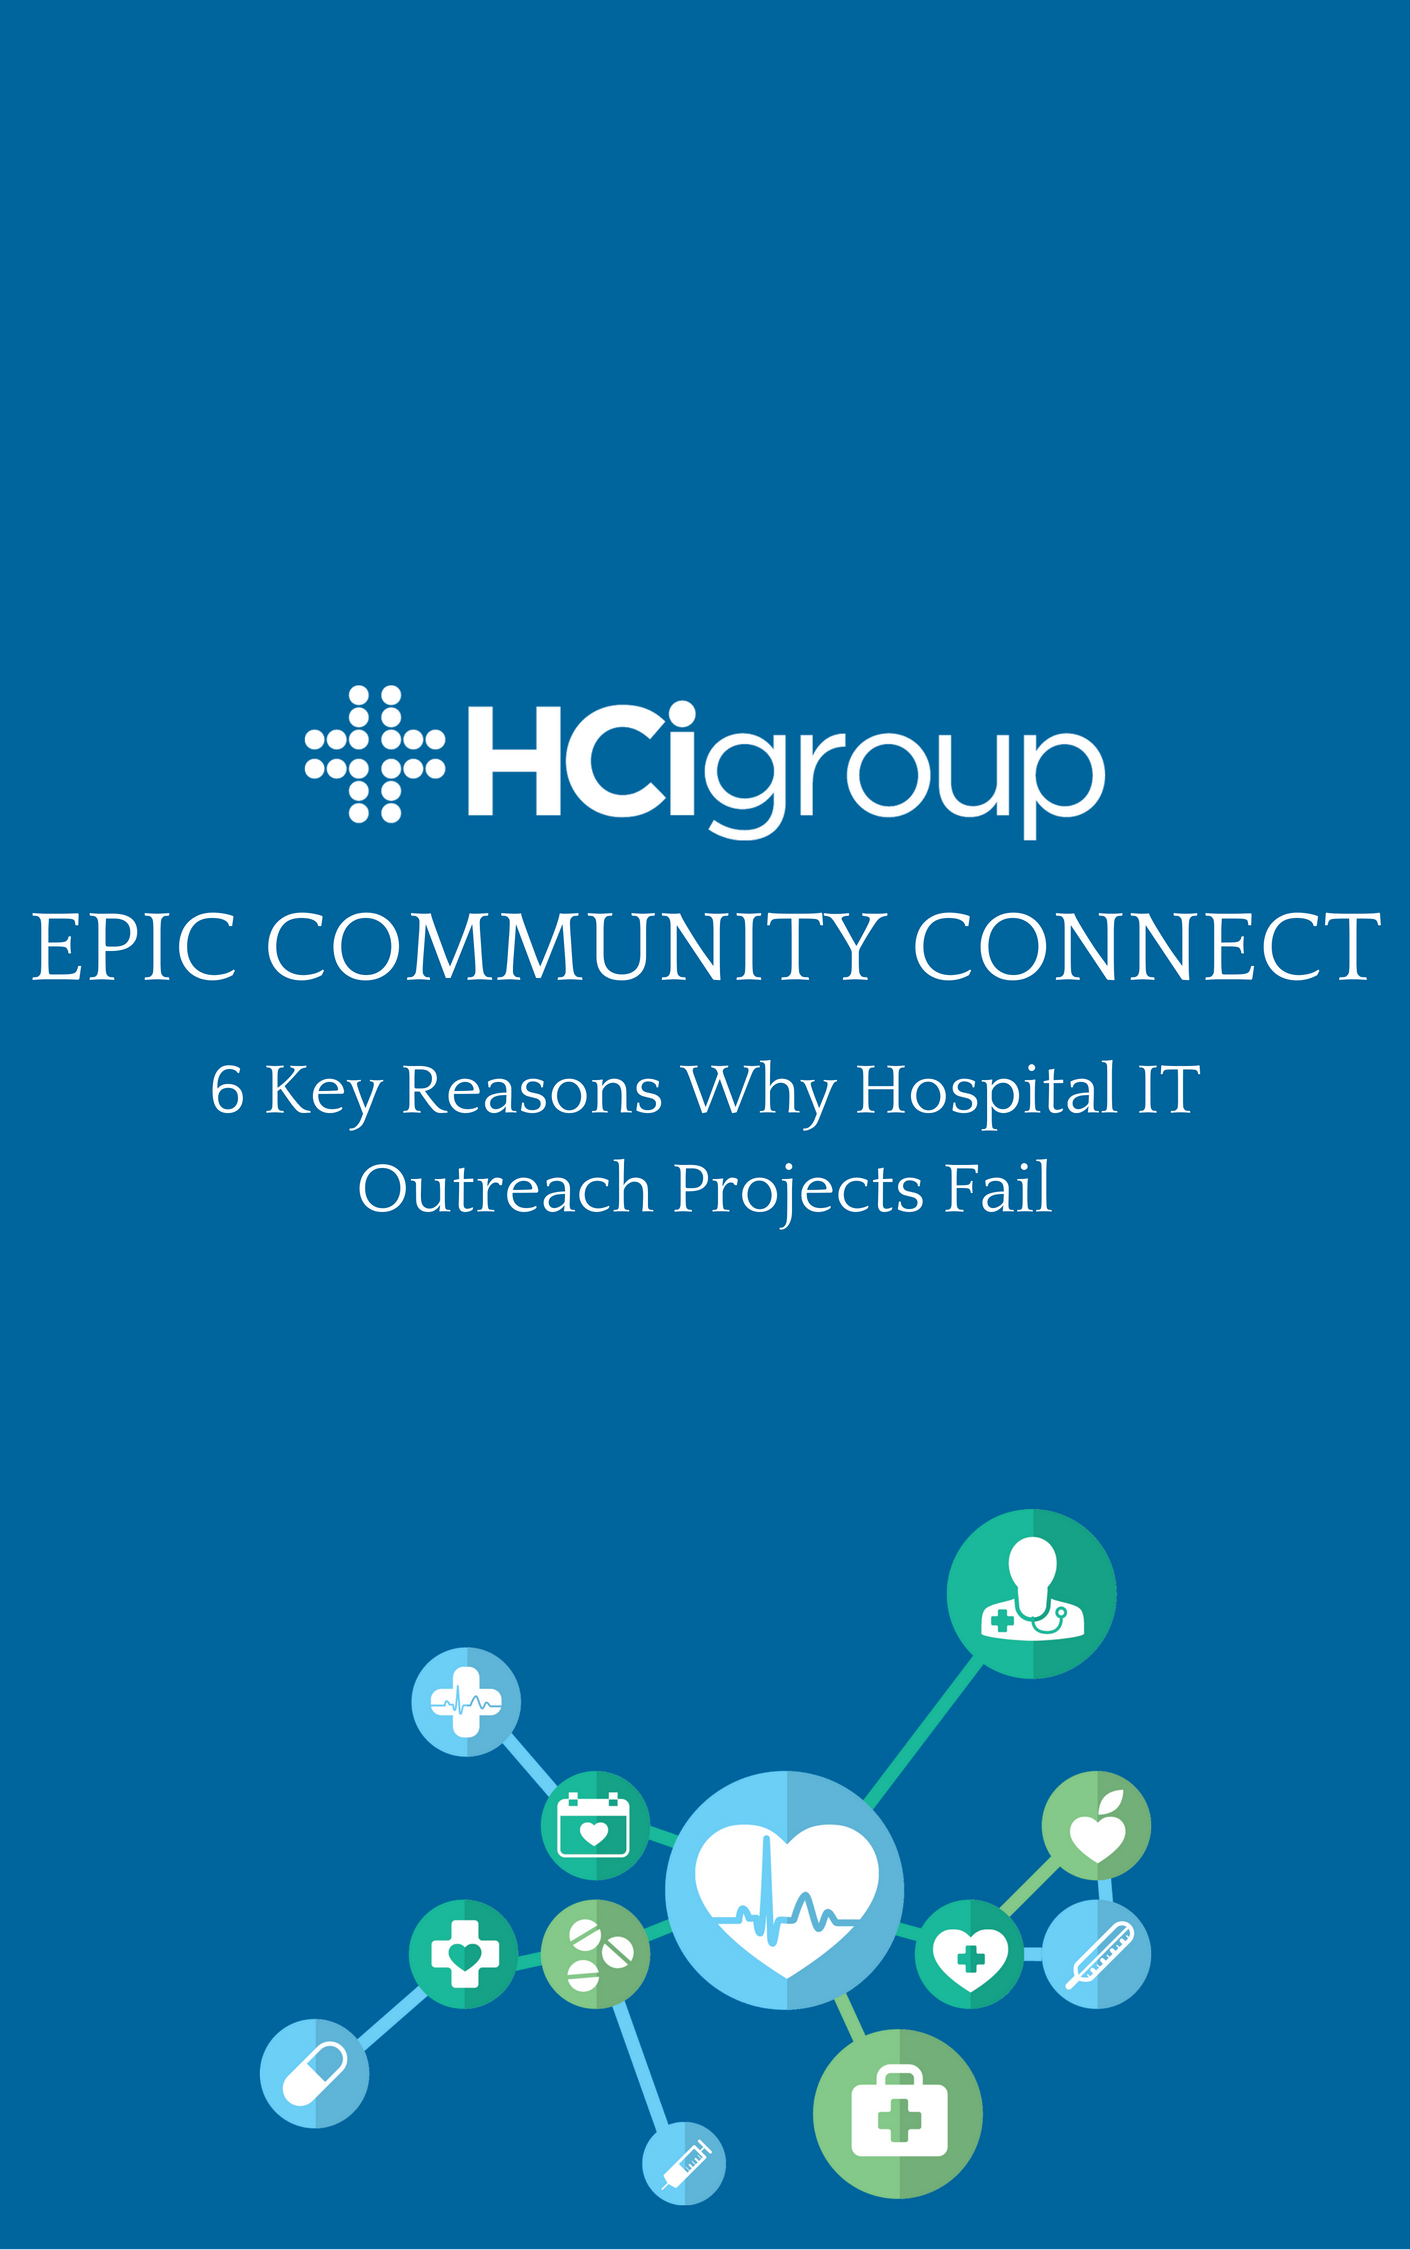 6 Key Reasons Why Hospital IT Outreach Projects Fail